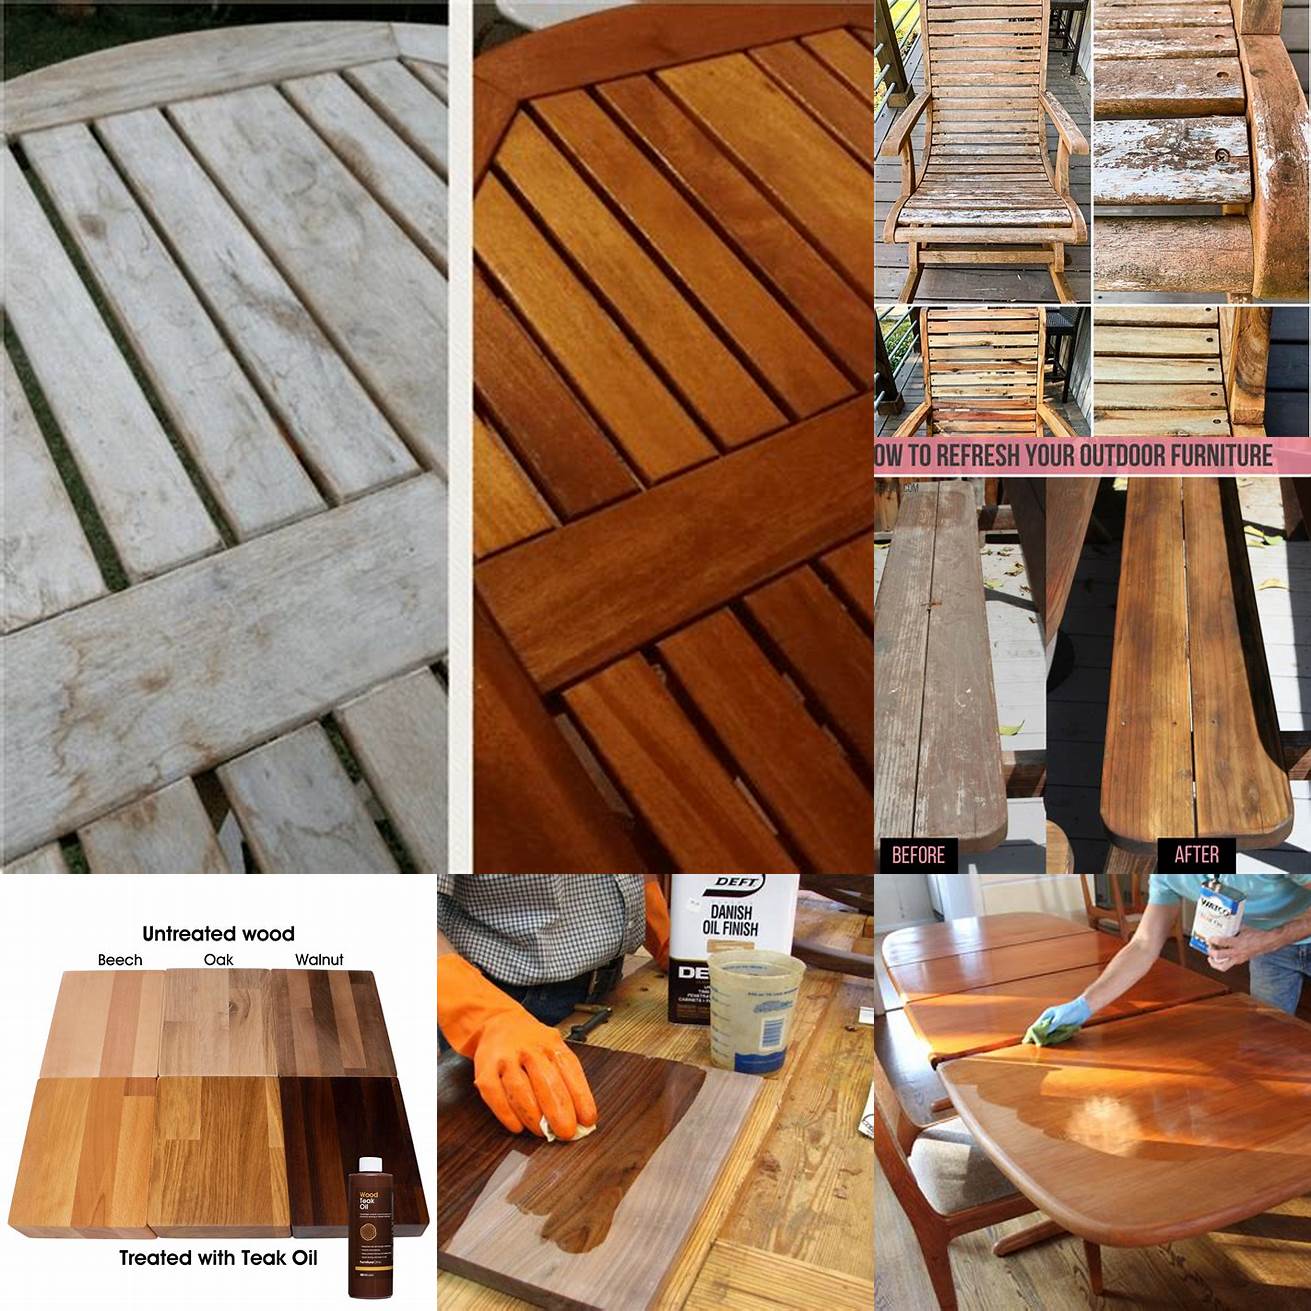 Furniture before and after being treated with teak wood oil